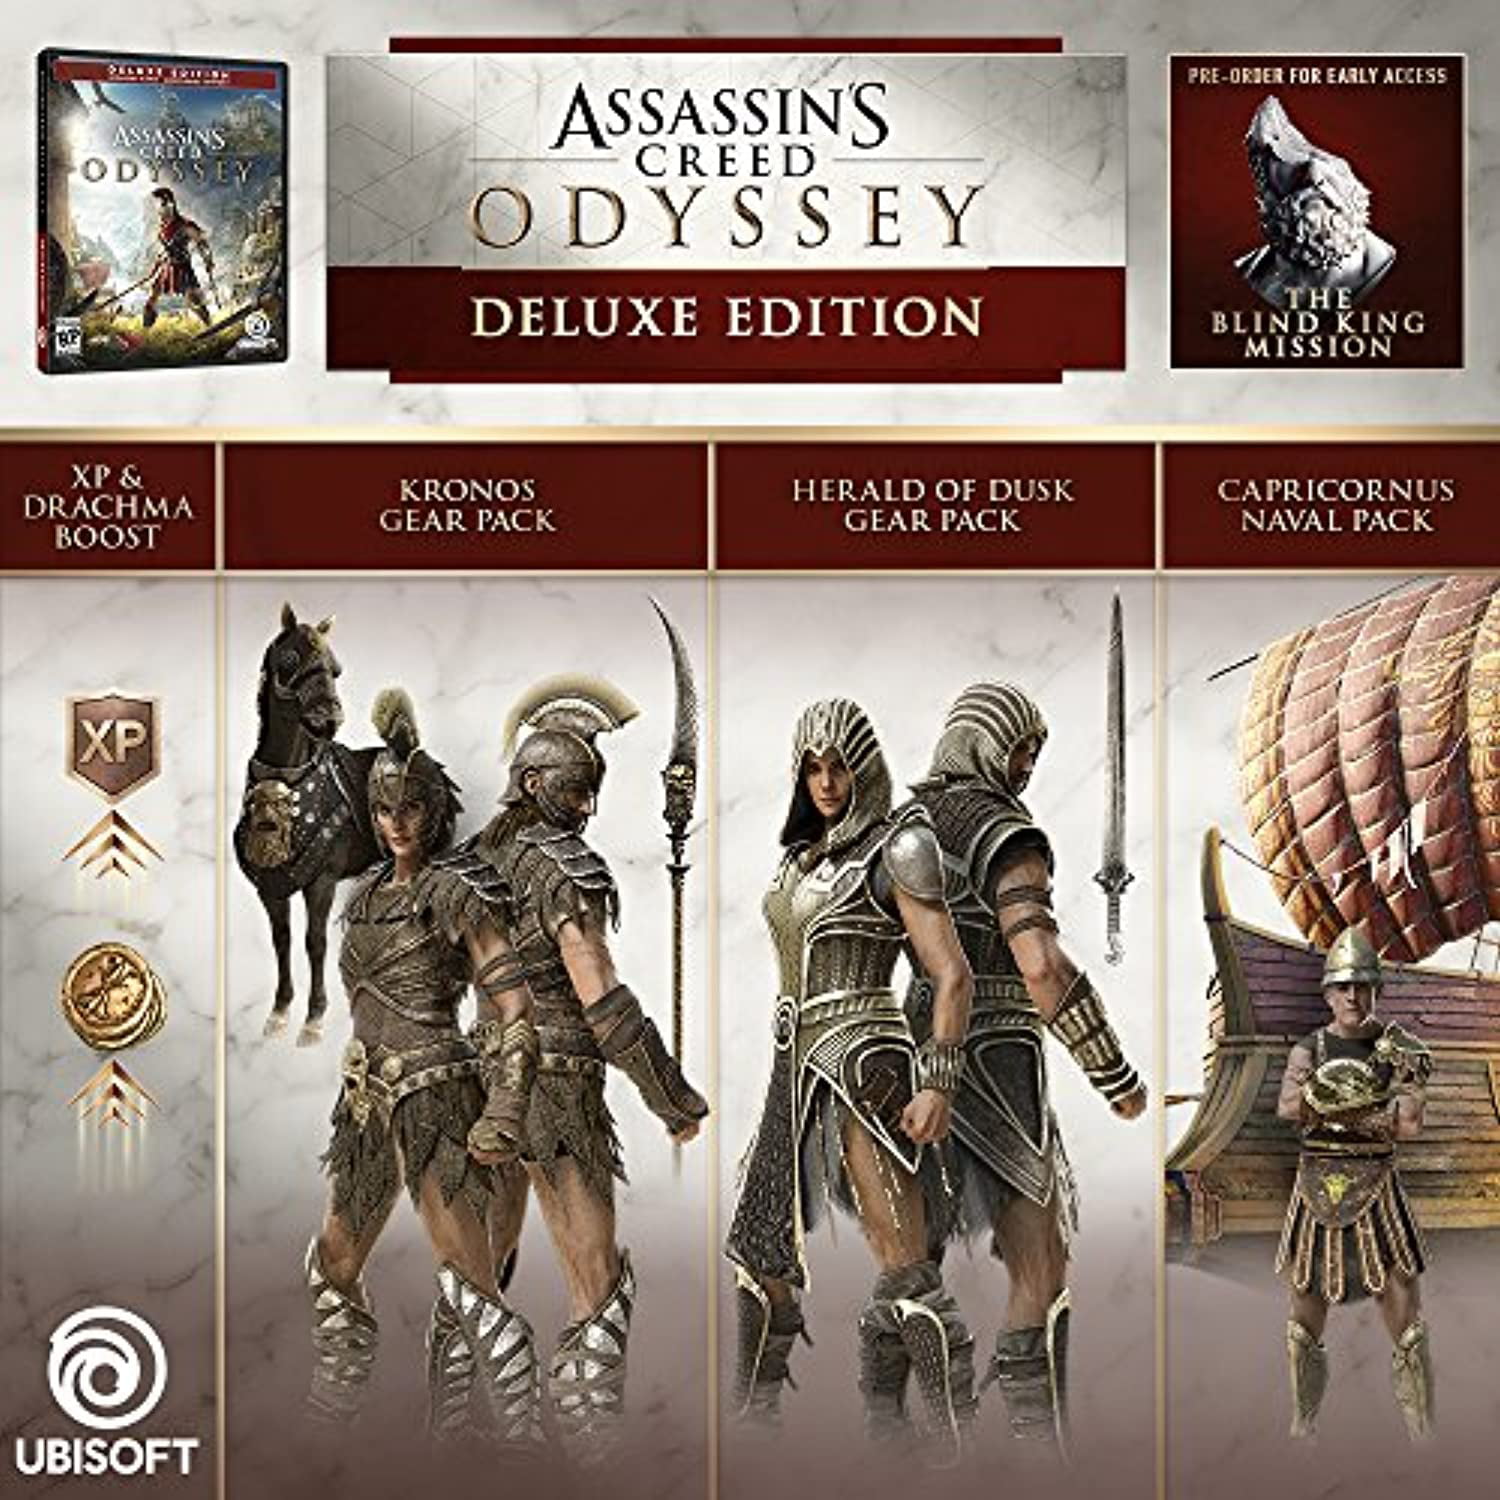 Assassin s creed odyssey editions. Assassin's Creed Odyssey набор Хронос. Набор Кронос Assassins Creed Odyssey. Assassin's Creed: Odyssey - Ultimate Edition. Набор "Хронос асасин Одисея.